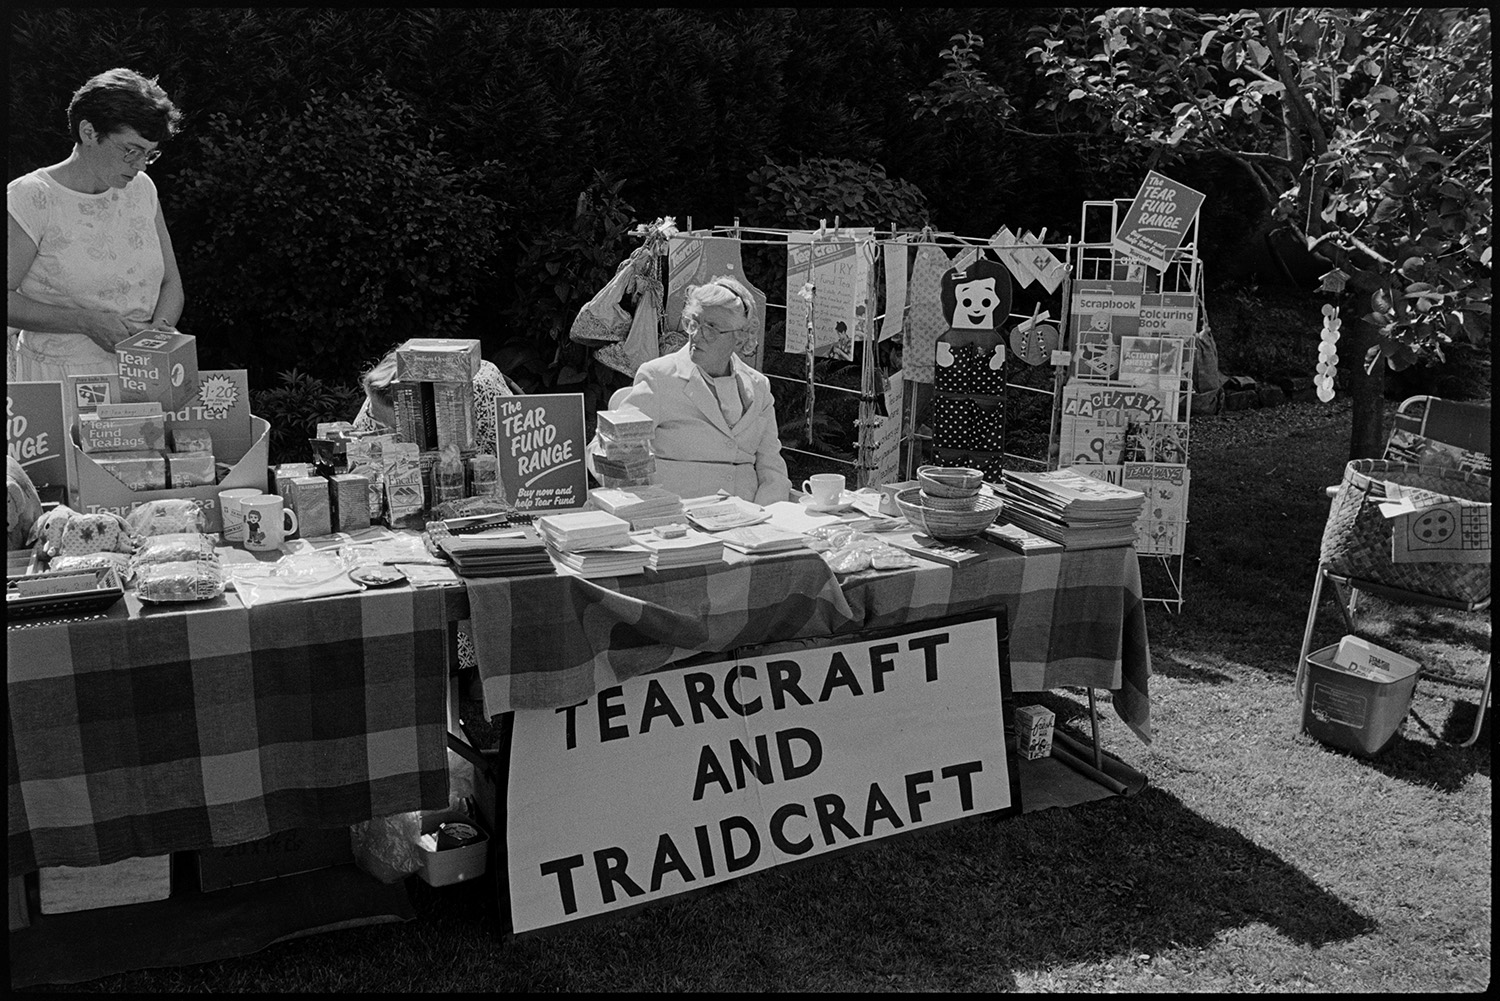 Vicarage fete, garden party people sitting at table with tea and cakes, women chatting. 
[Two women running a Tearcraft and Traidcraft stall at Kings Nympton vicarage fete. Various items are for sale including tea, mugs, books and baskets.]